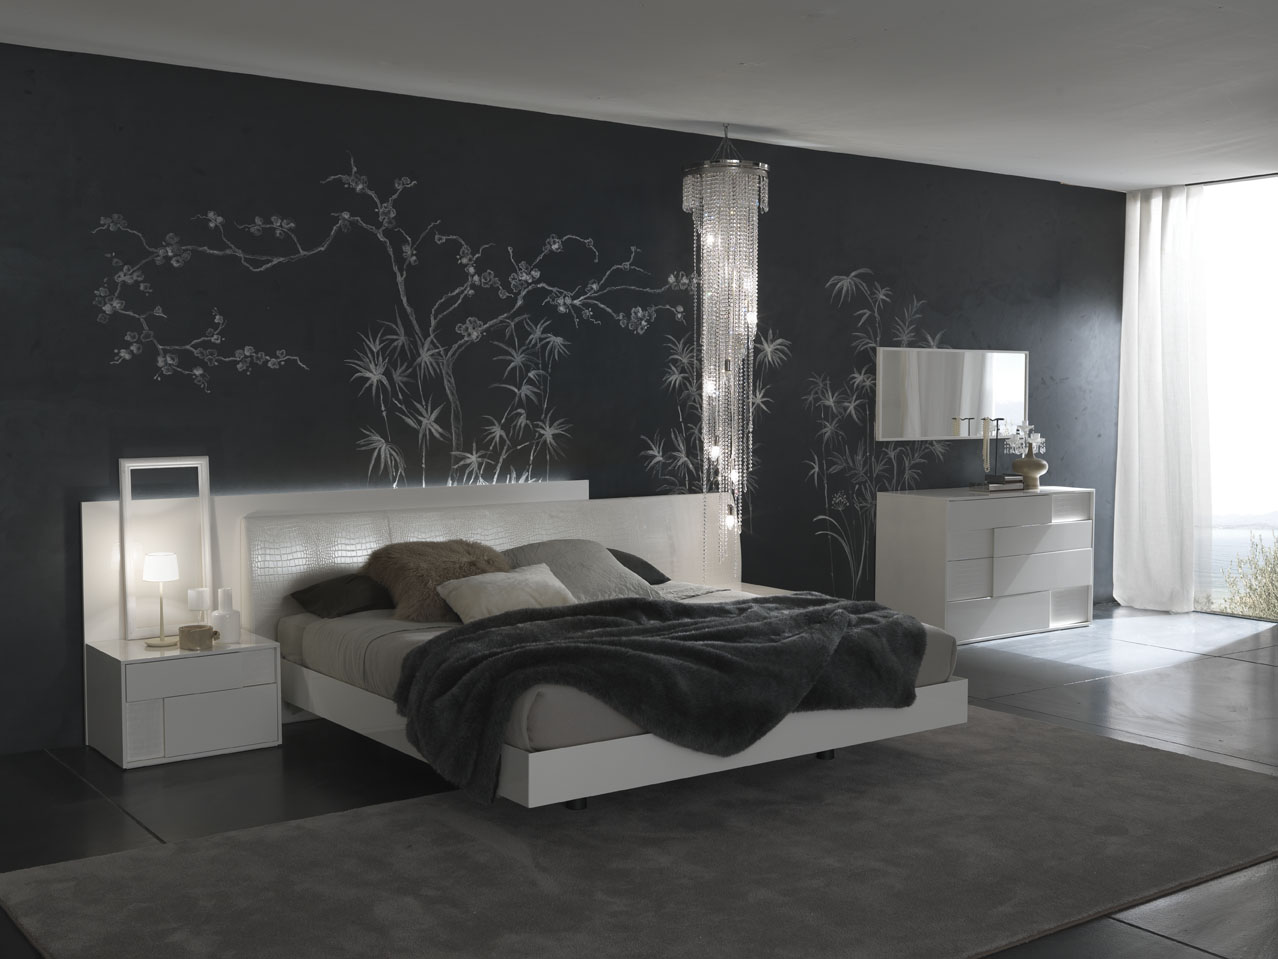 Bedroom Wall Decorating Ideas Pictures